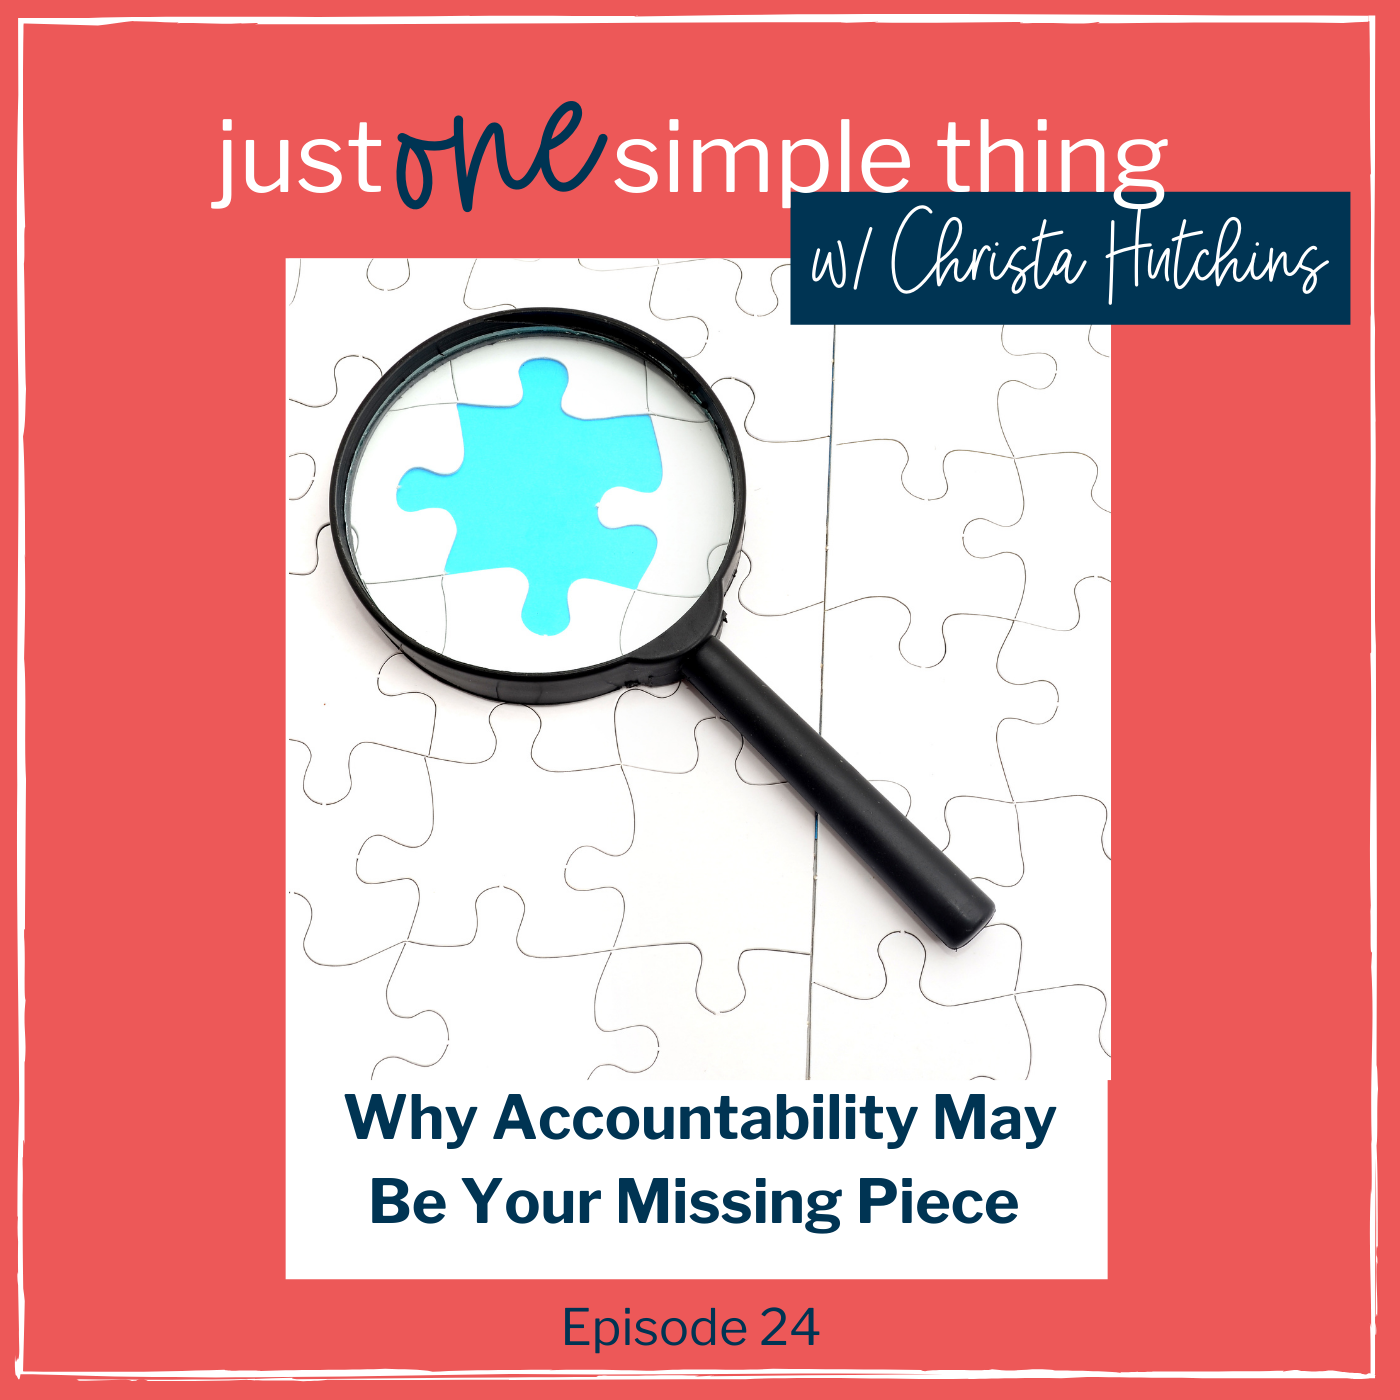 Why Accountability May Be Your Missing Piece